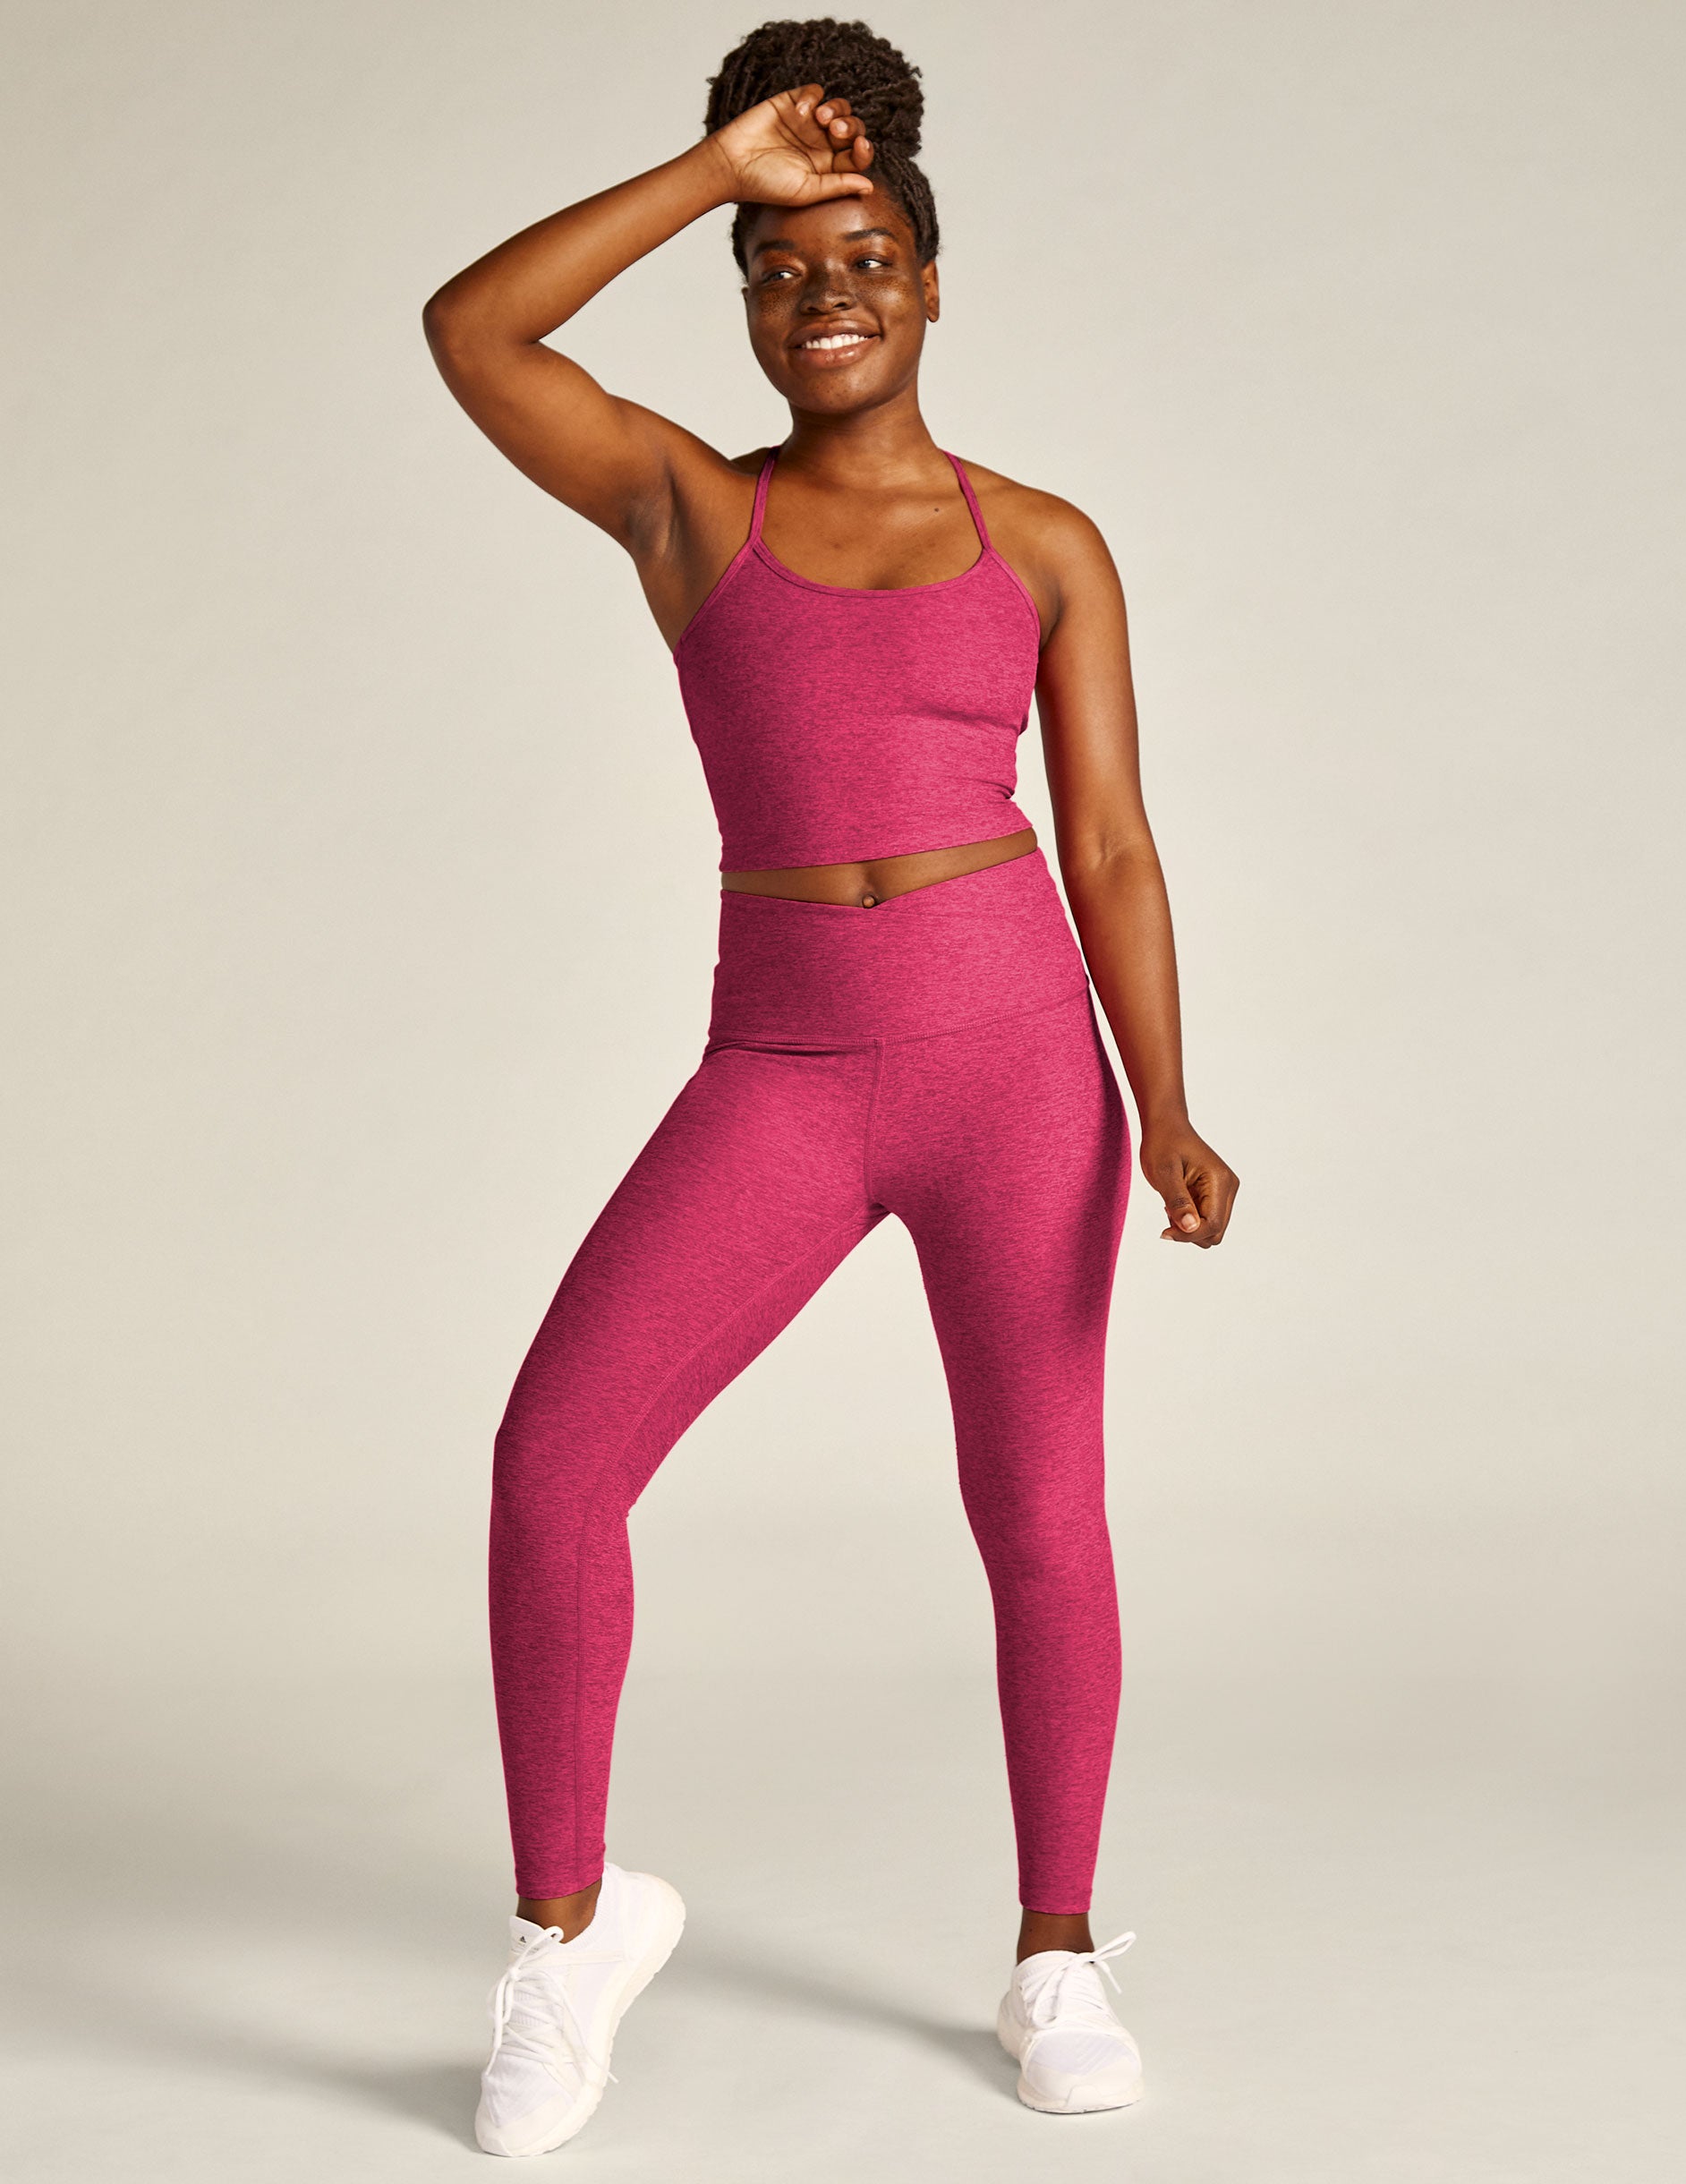 Beyond Yoga High Waisted Practice Pant - Cranberry Heather